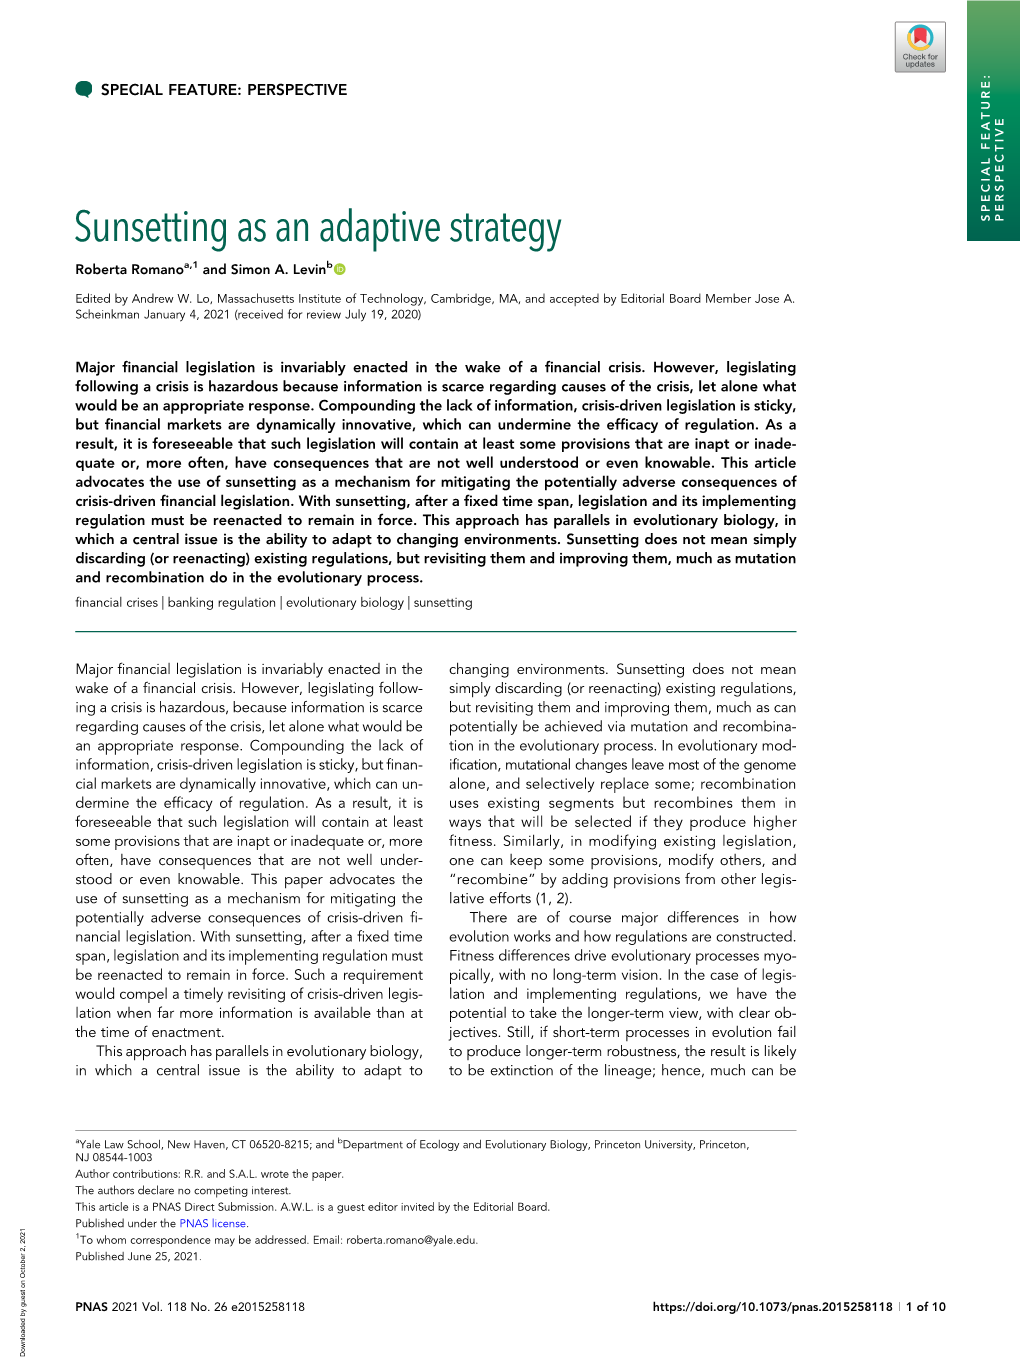 Sunsetting As an Adaptive Strategy SPECIAL FEATURE: PERSPECTIVE Roberta Romanoa,1 and Simon A